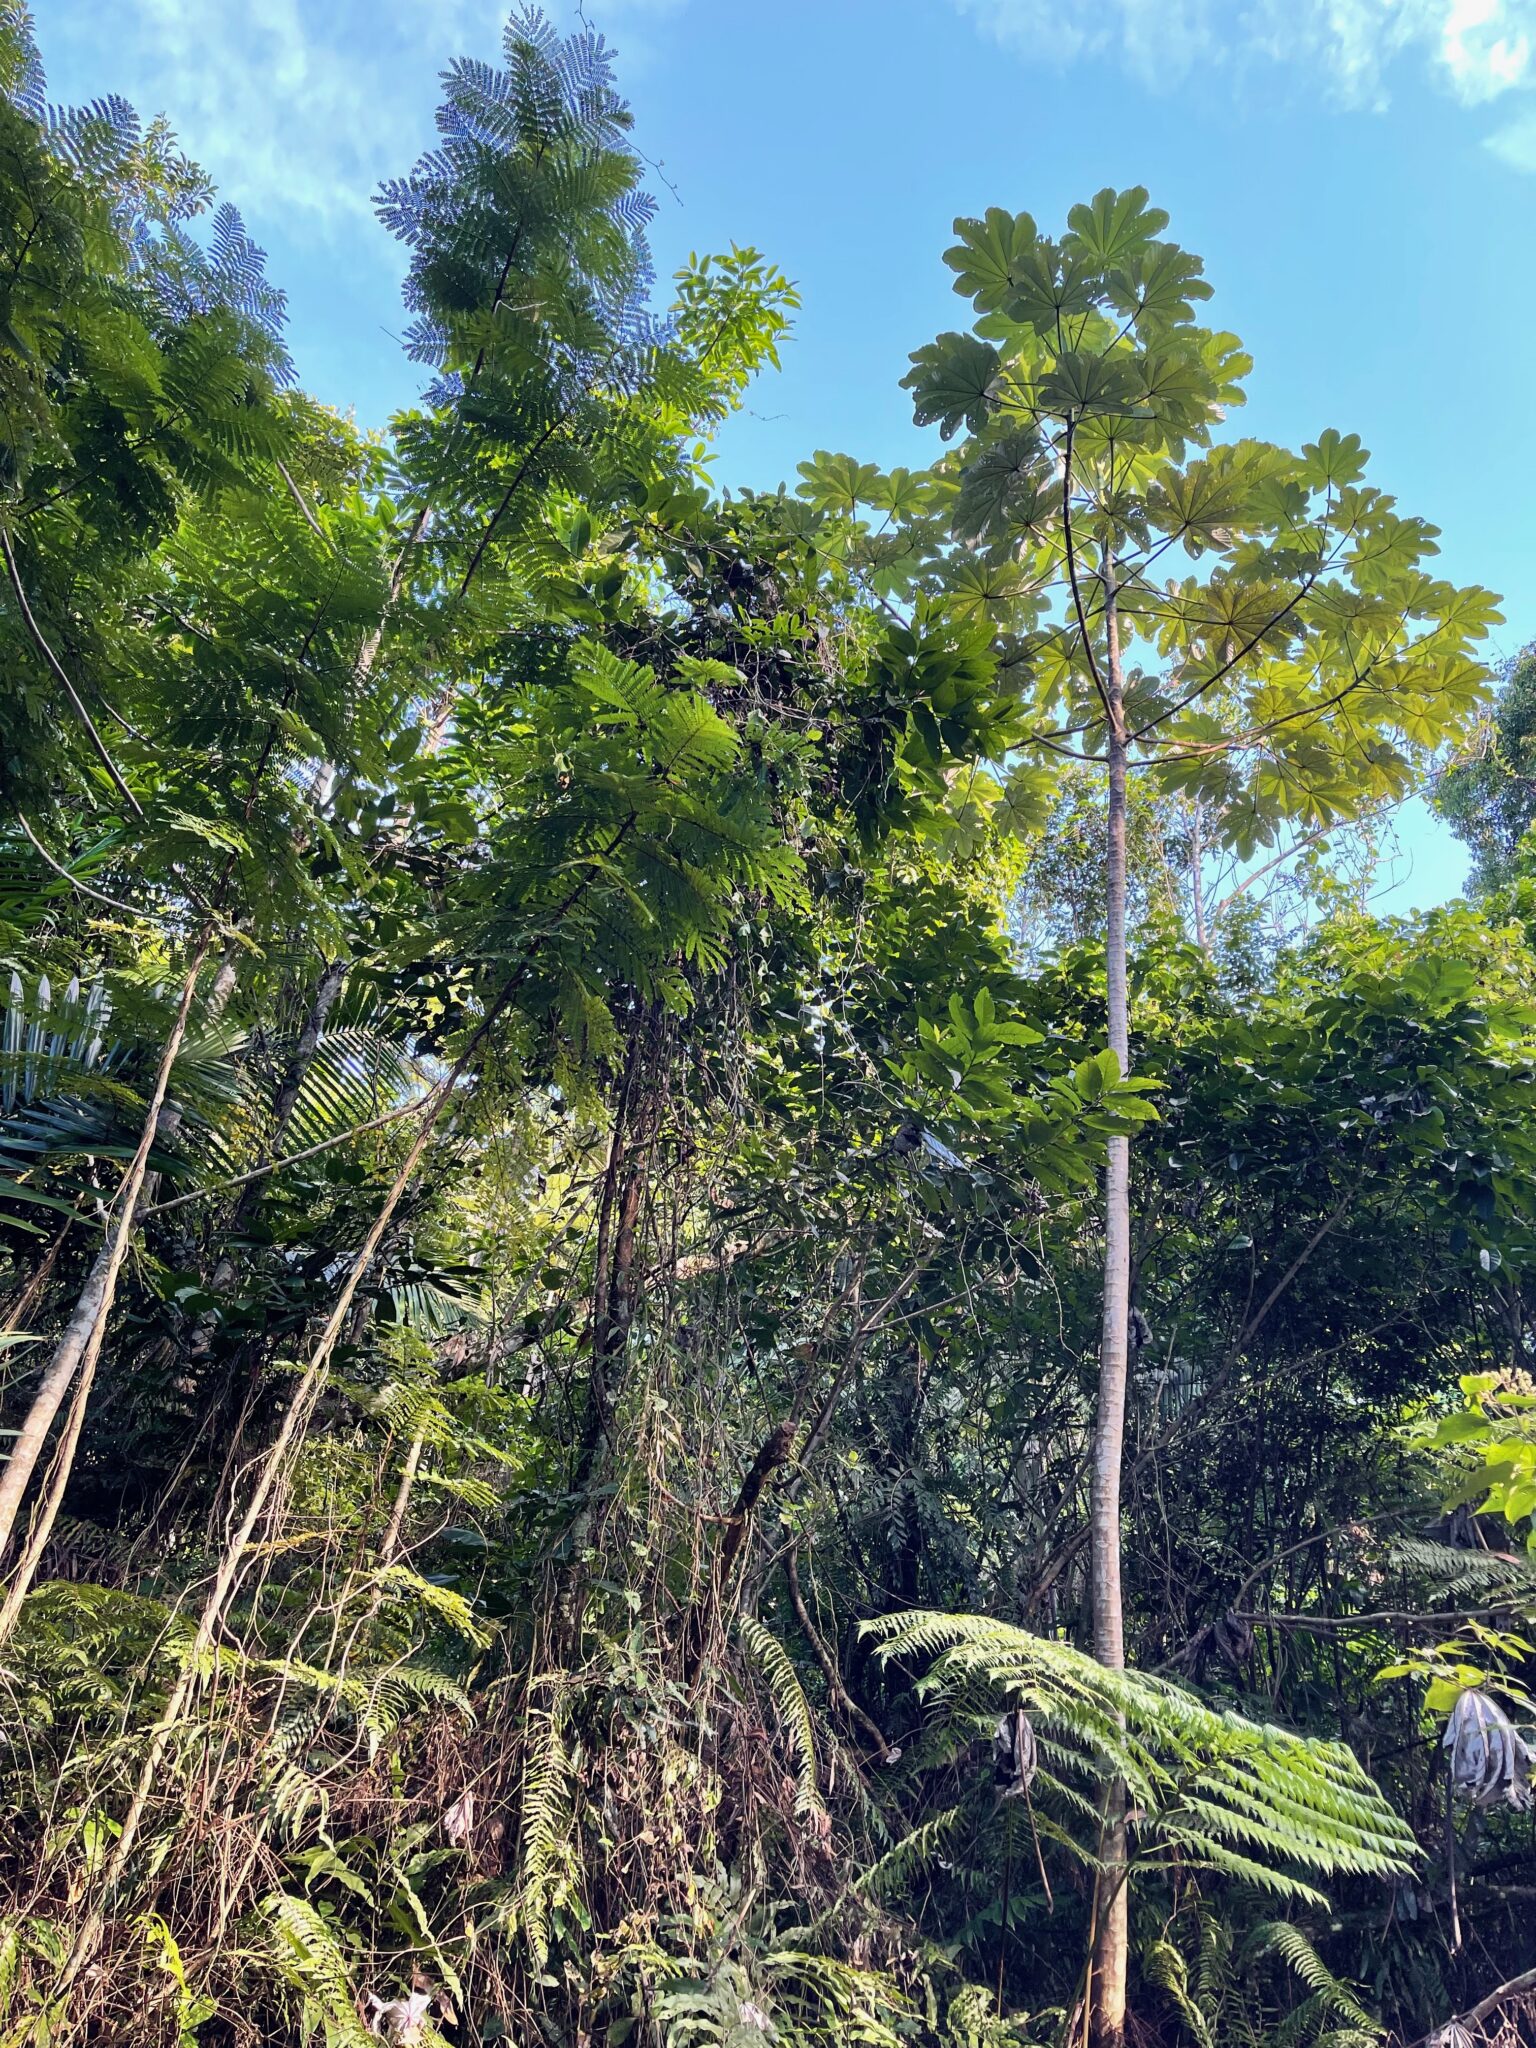 Trees in El Yunque National Forest, Puerto Rico. Photo by ConsumerMojo.com